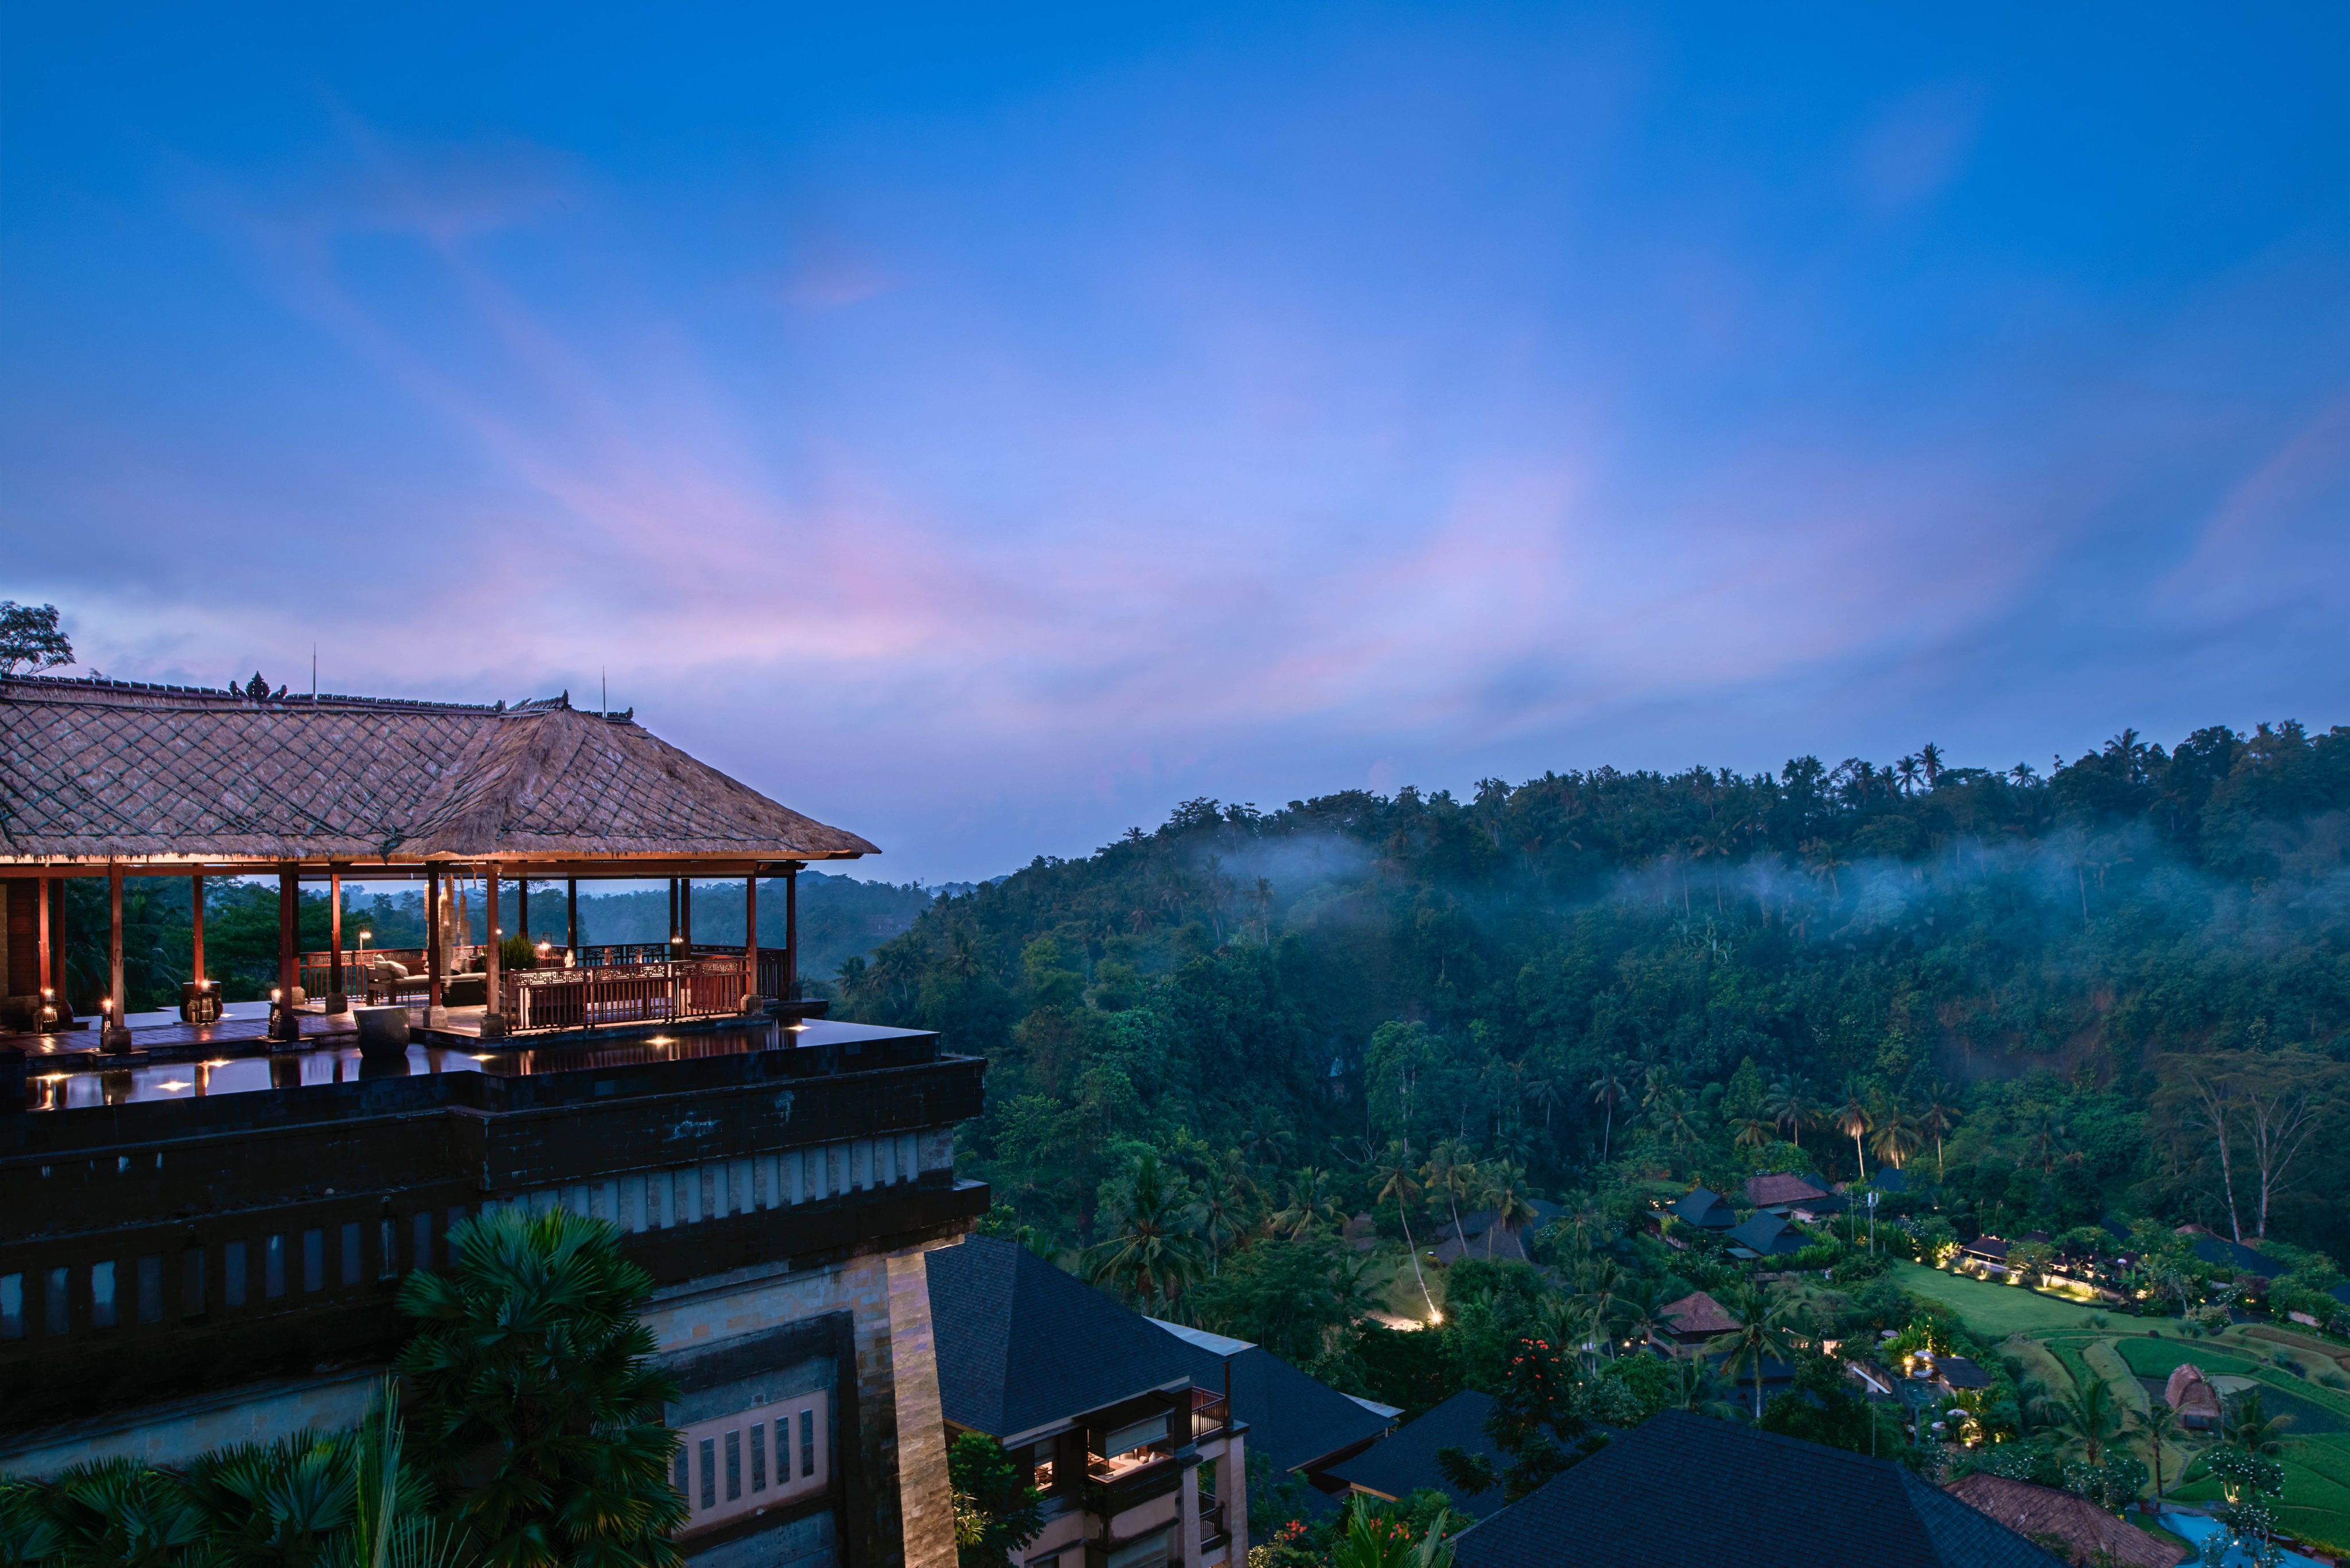 Mandapa, a Ritz-Carlton Reserve in Bali offers a Disconnect to Reconnect programme, the ideal antidote to mobile phones, with art, sound and wellness classes. Photo: Handout